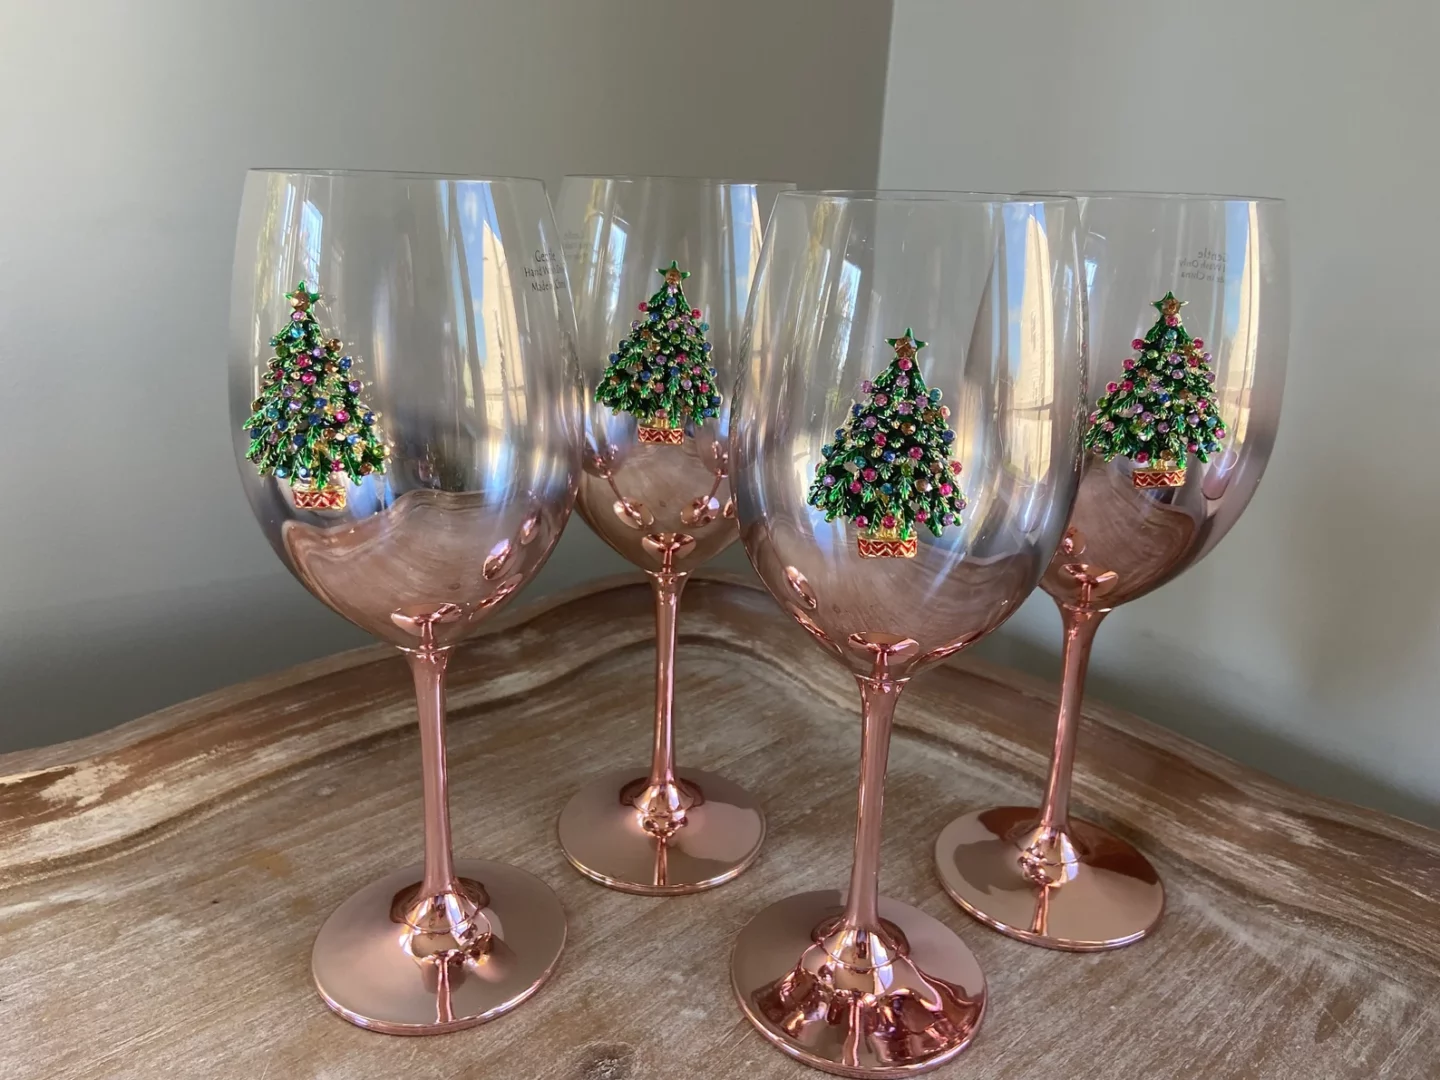 Metallic Pink wine glasses featuring bedazzled Christmas trees